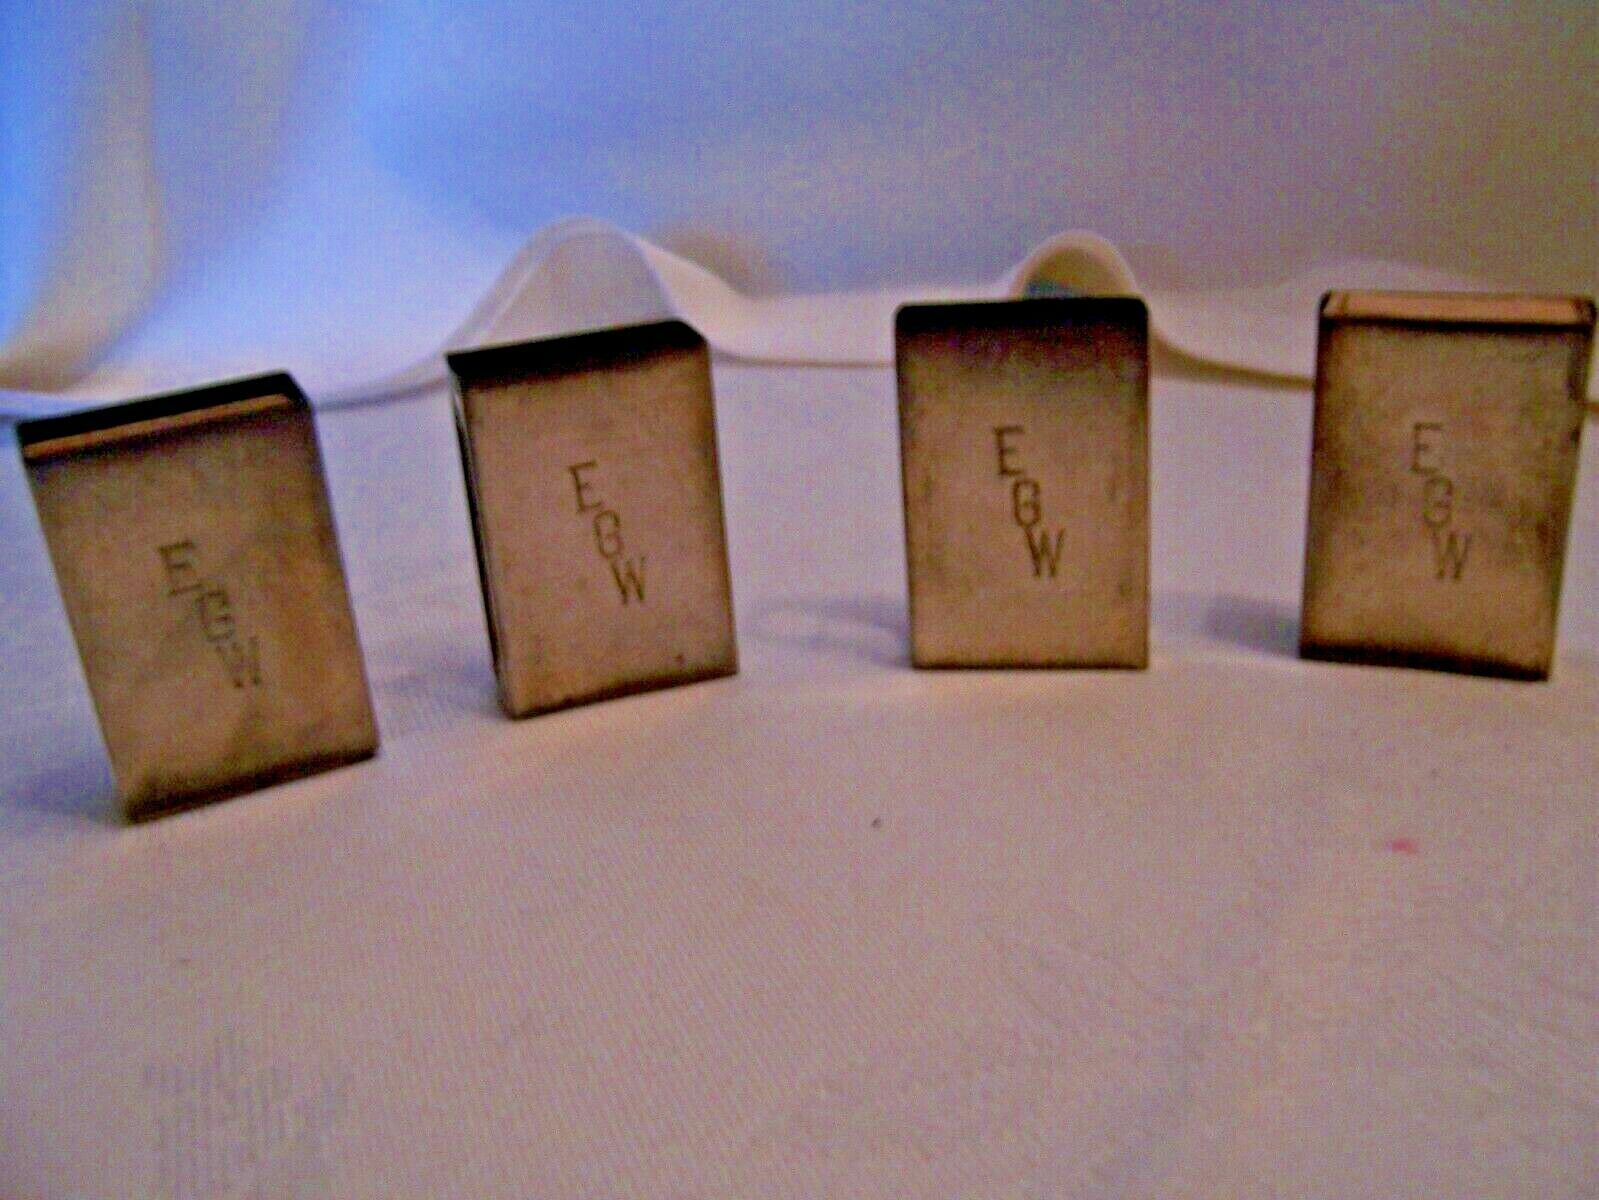 4 VINTAGE STERLING SILVER COVERS W/ SLITS TO STRIKE THE WOOD SWEDISH MATCH BOXES